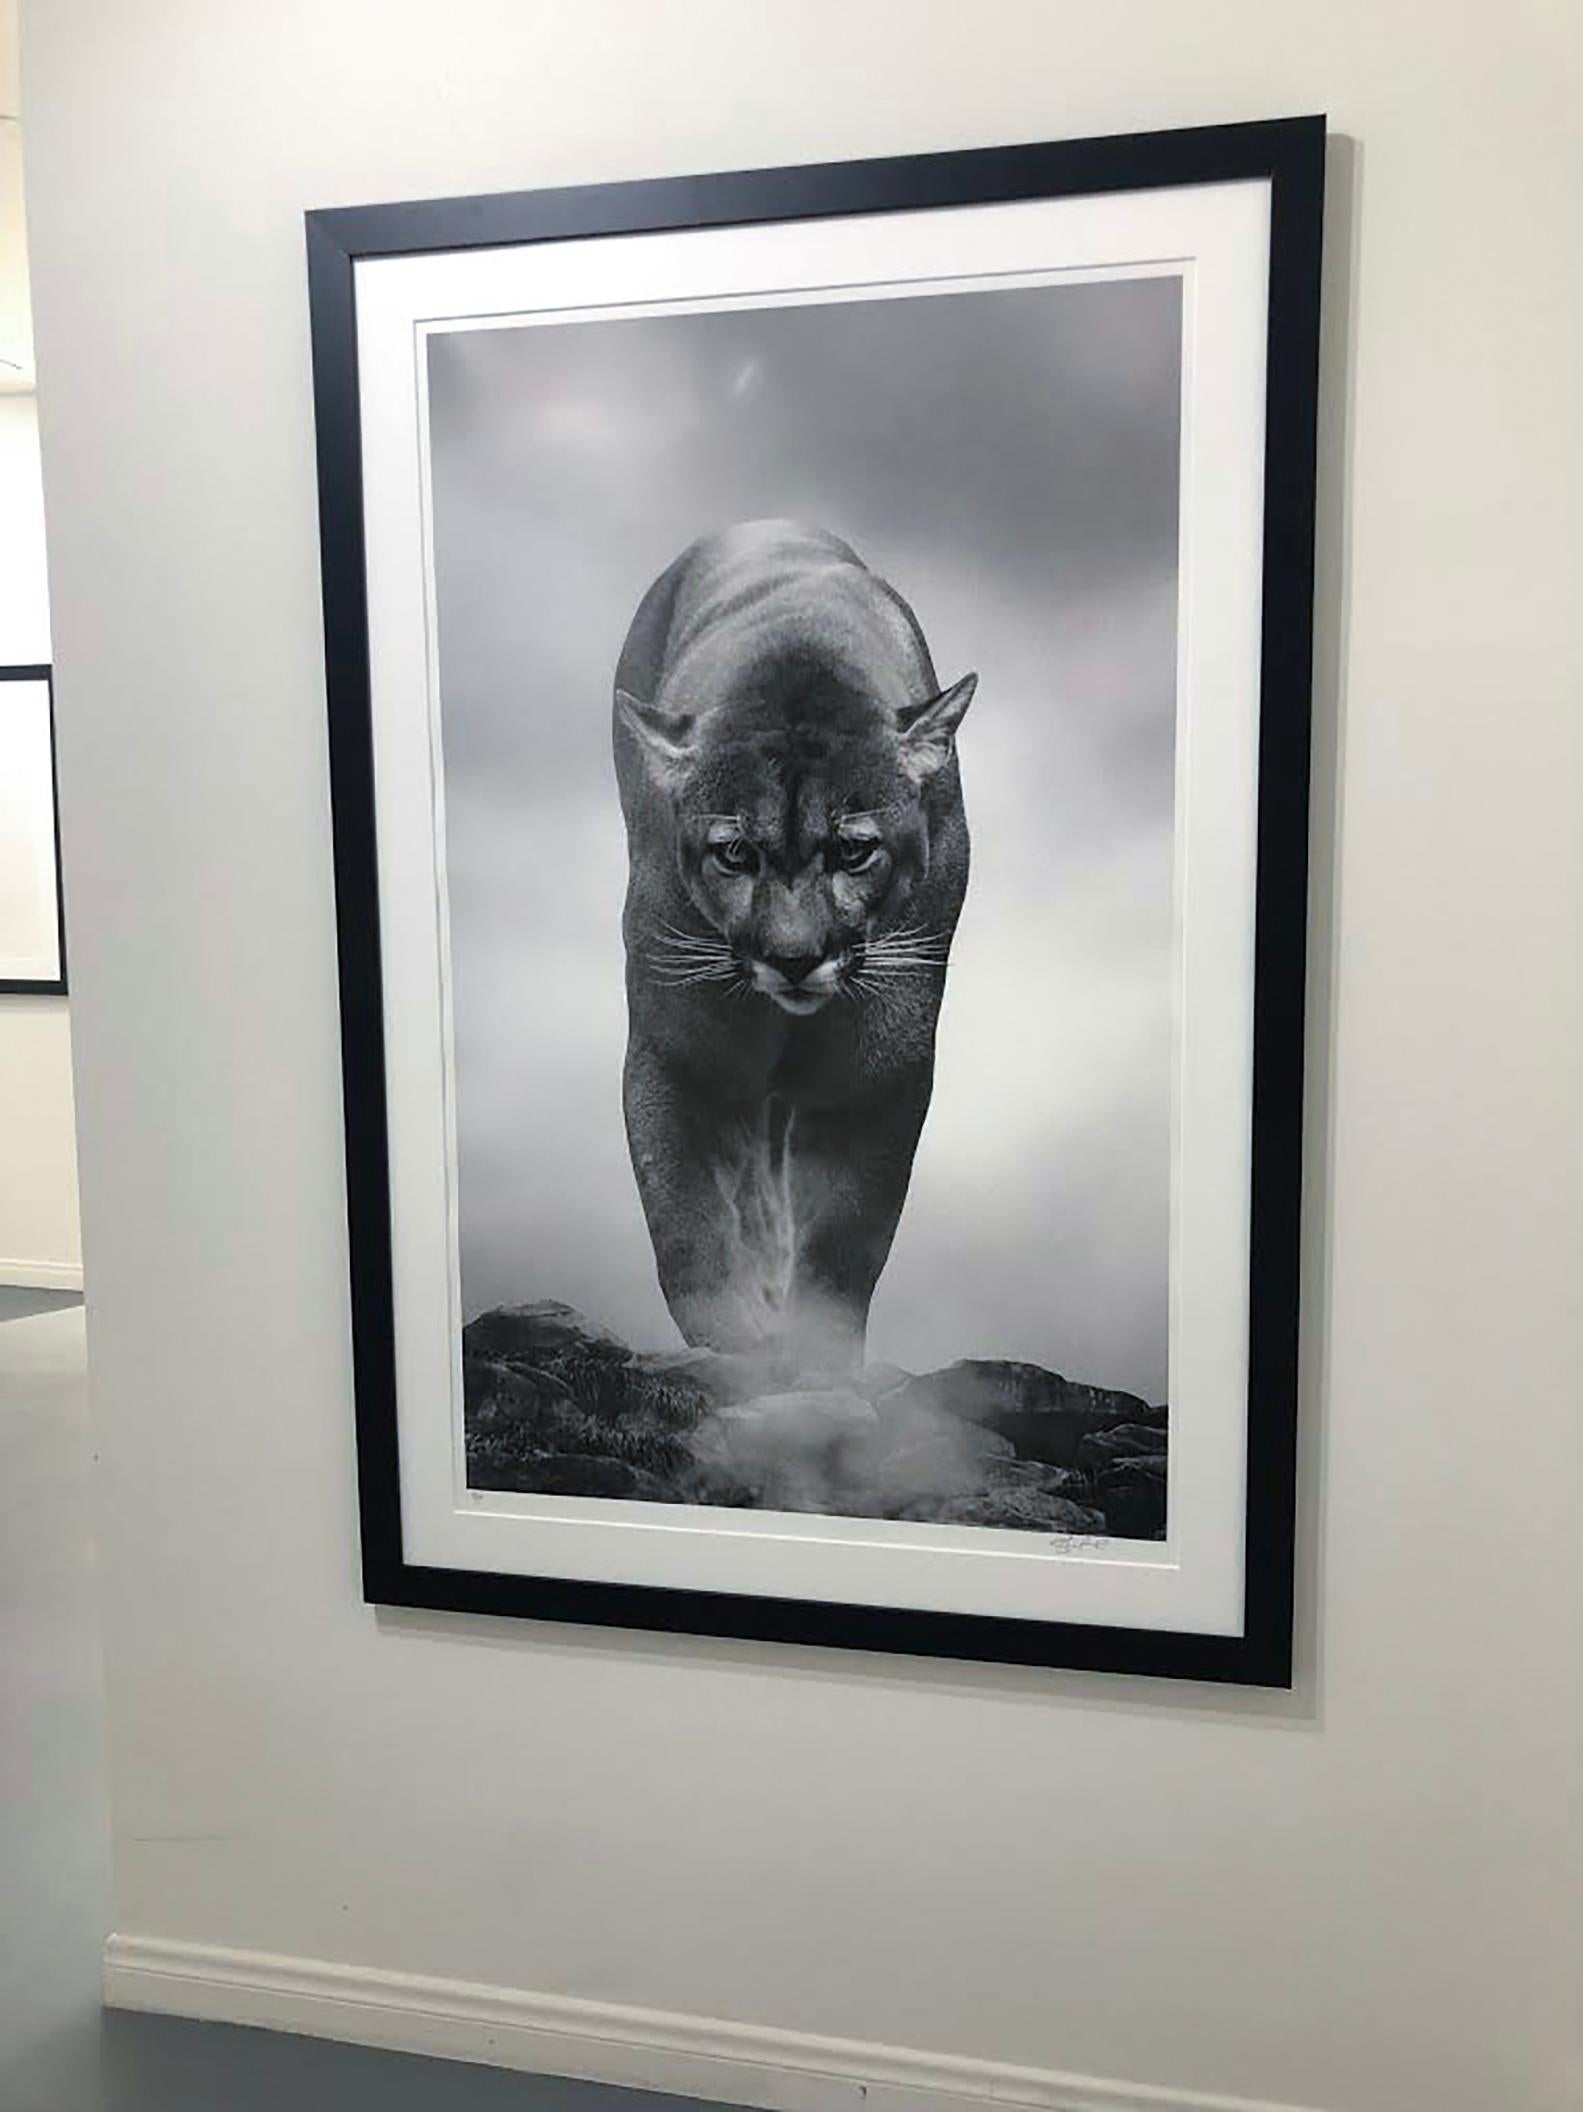  36x48 Black and White Photography, Cougar Photograph, Mountain Lion Art 1